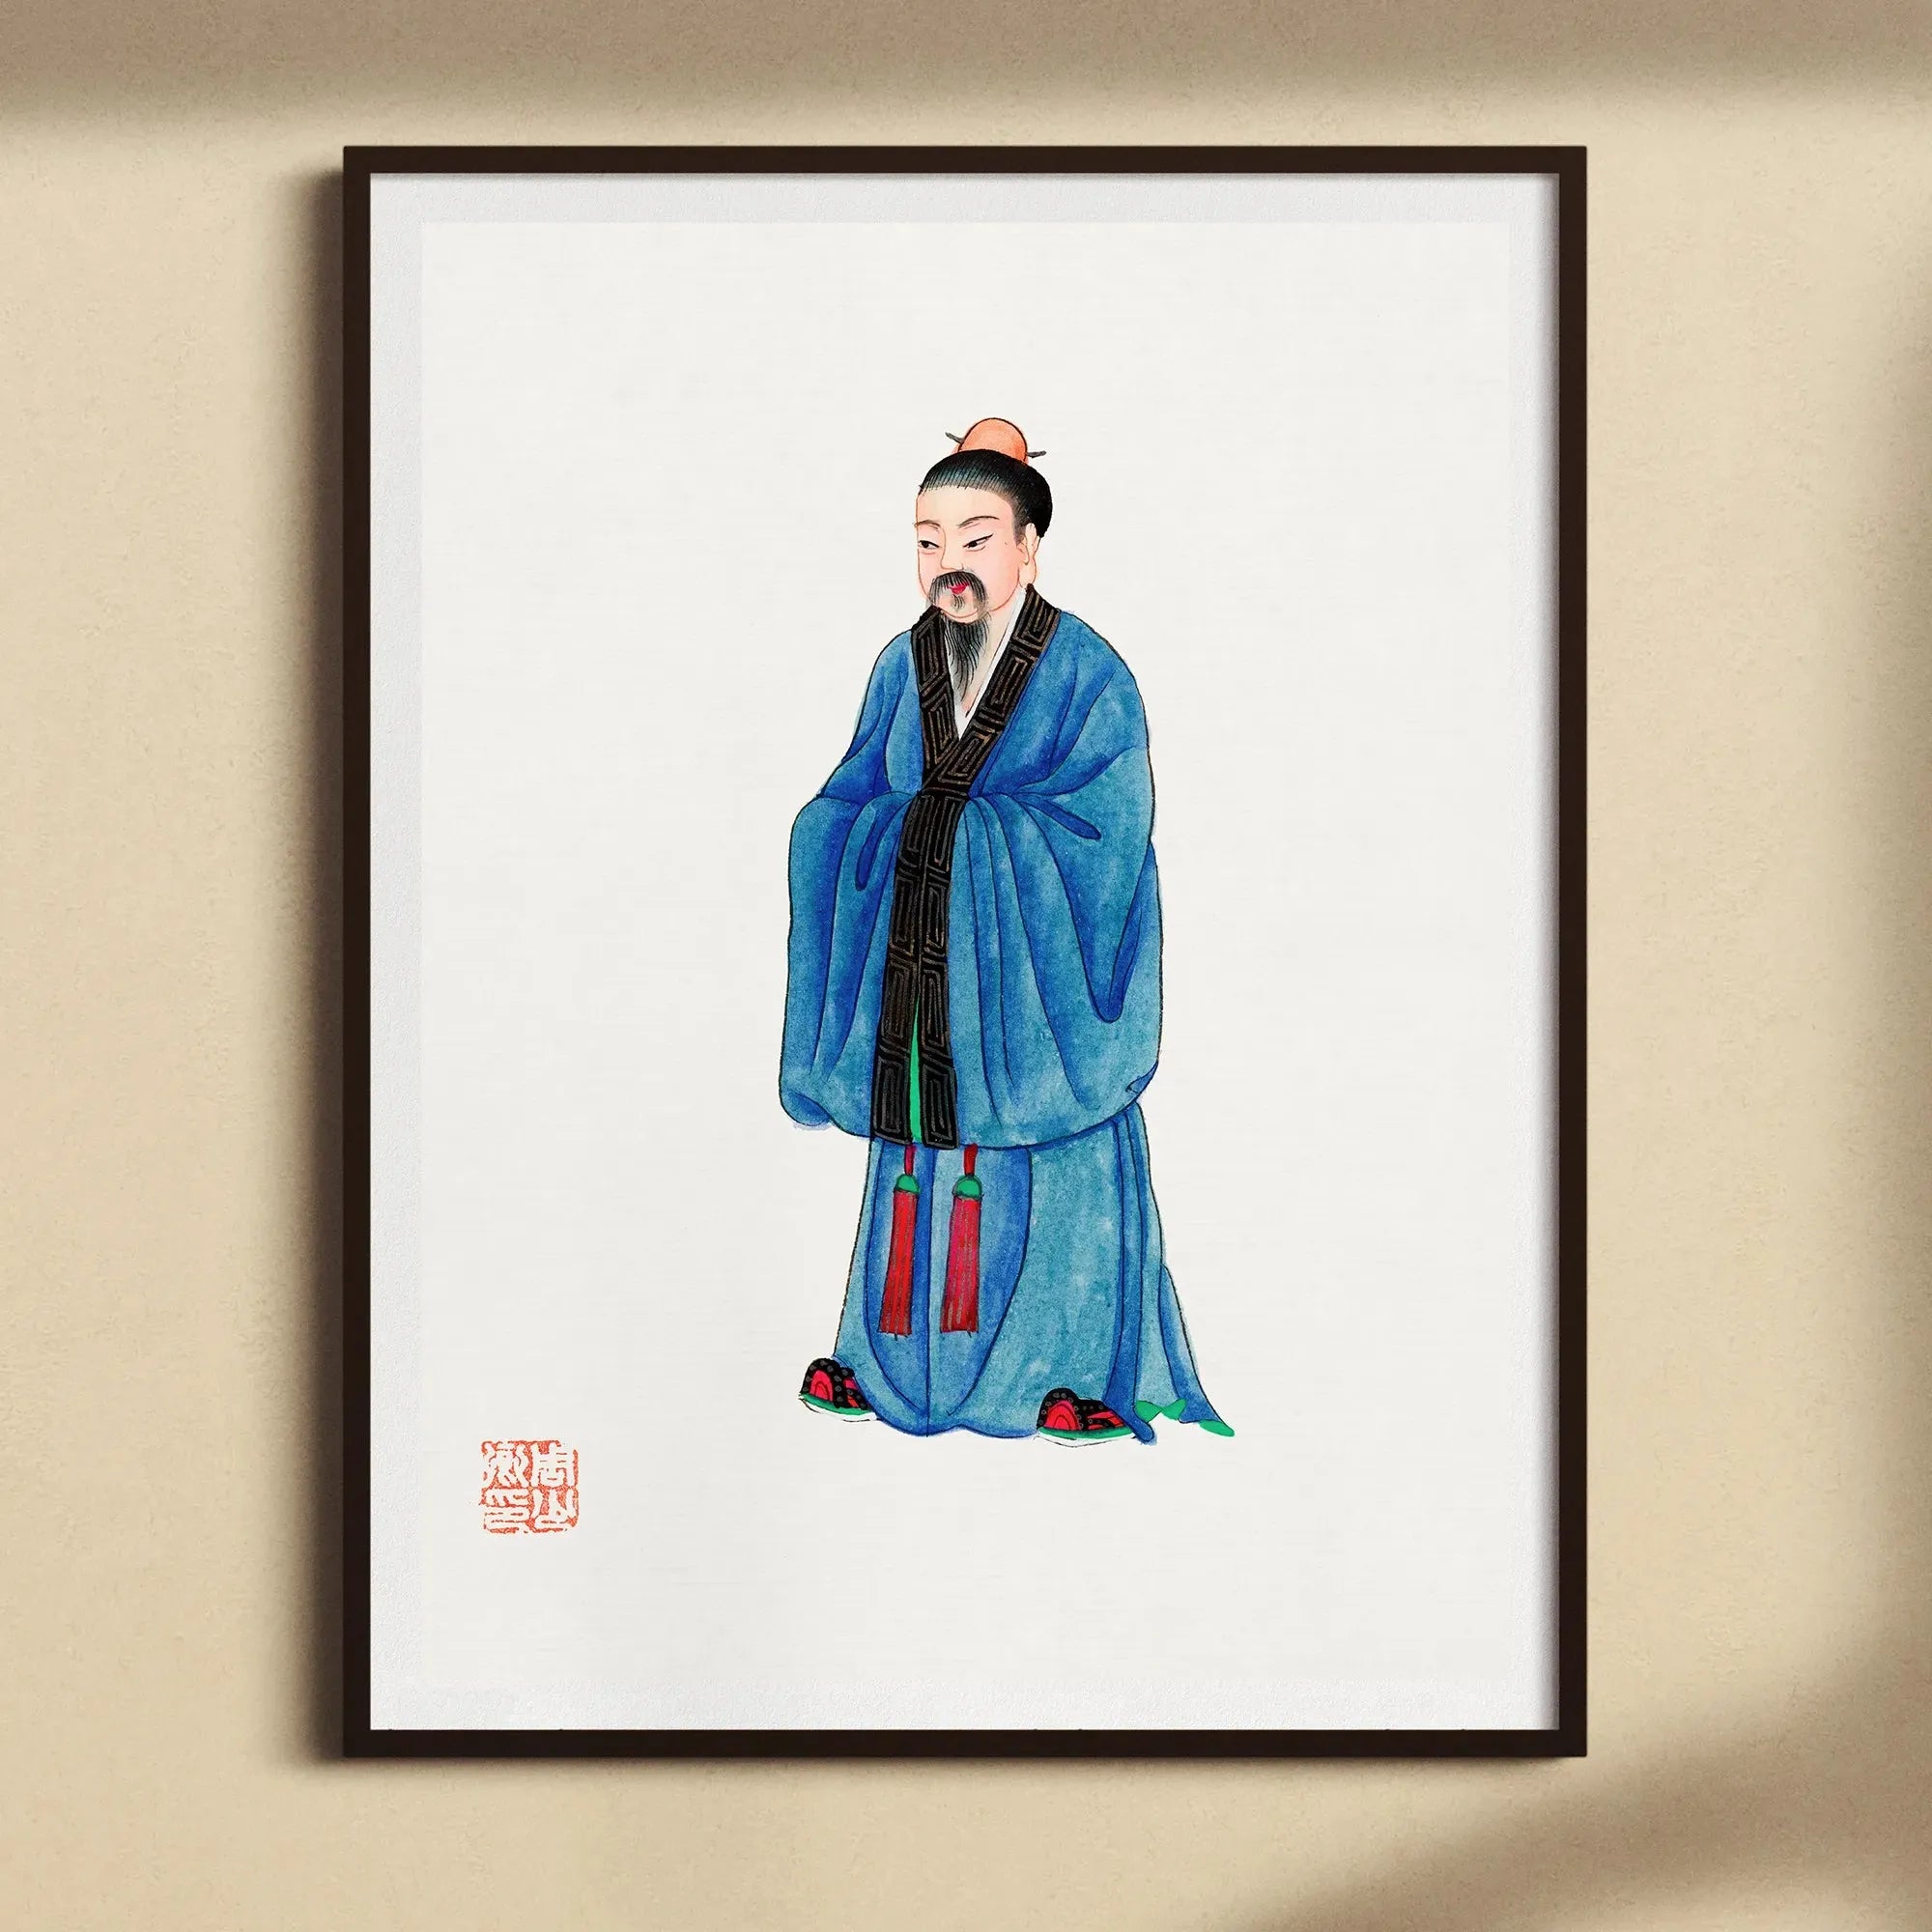 Chinese Master Framed & Mounted Print - Posters Prints & Visual Artwork - Aesthetic Art